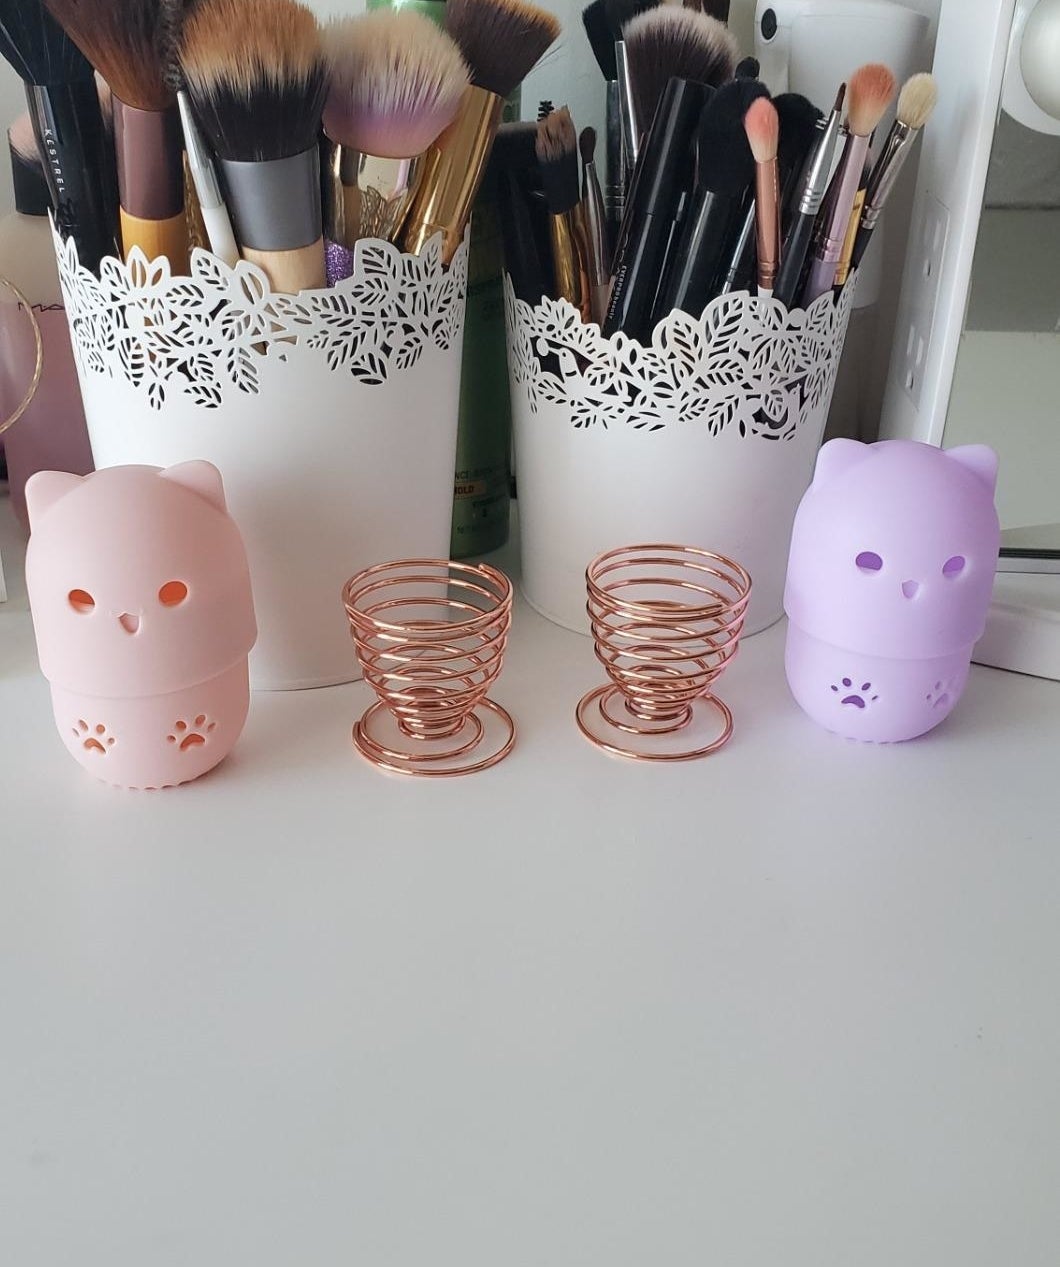 Reviewer&#x27;s pink and purple cat cases and two egg cup-like sponge holders in front of their makeup brush collection